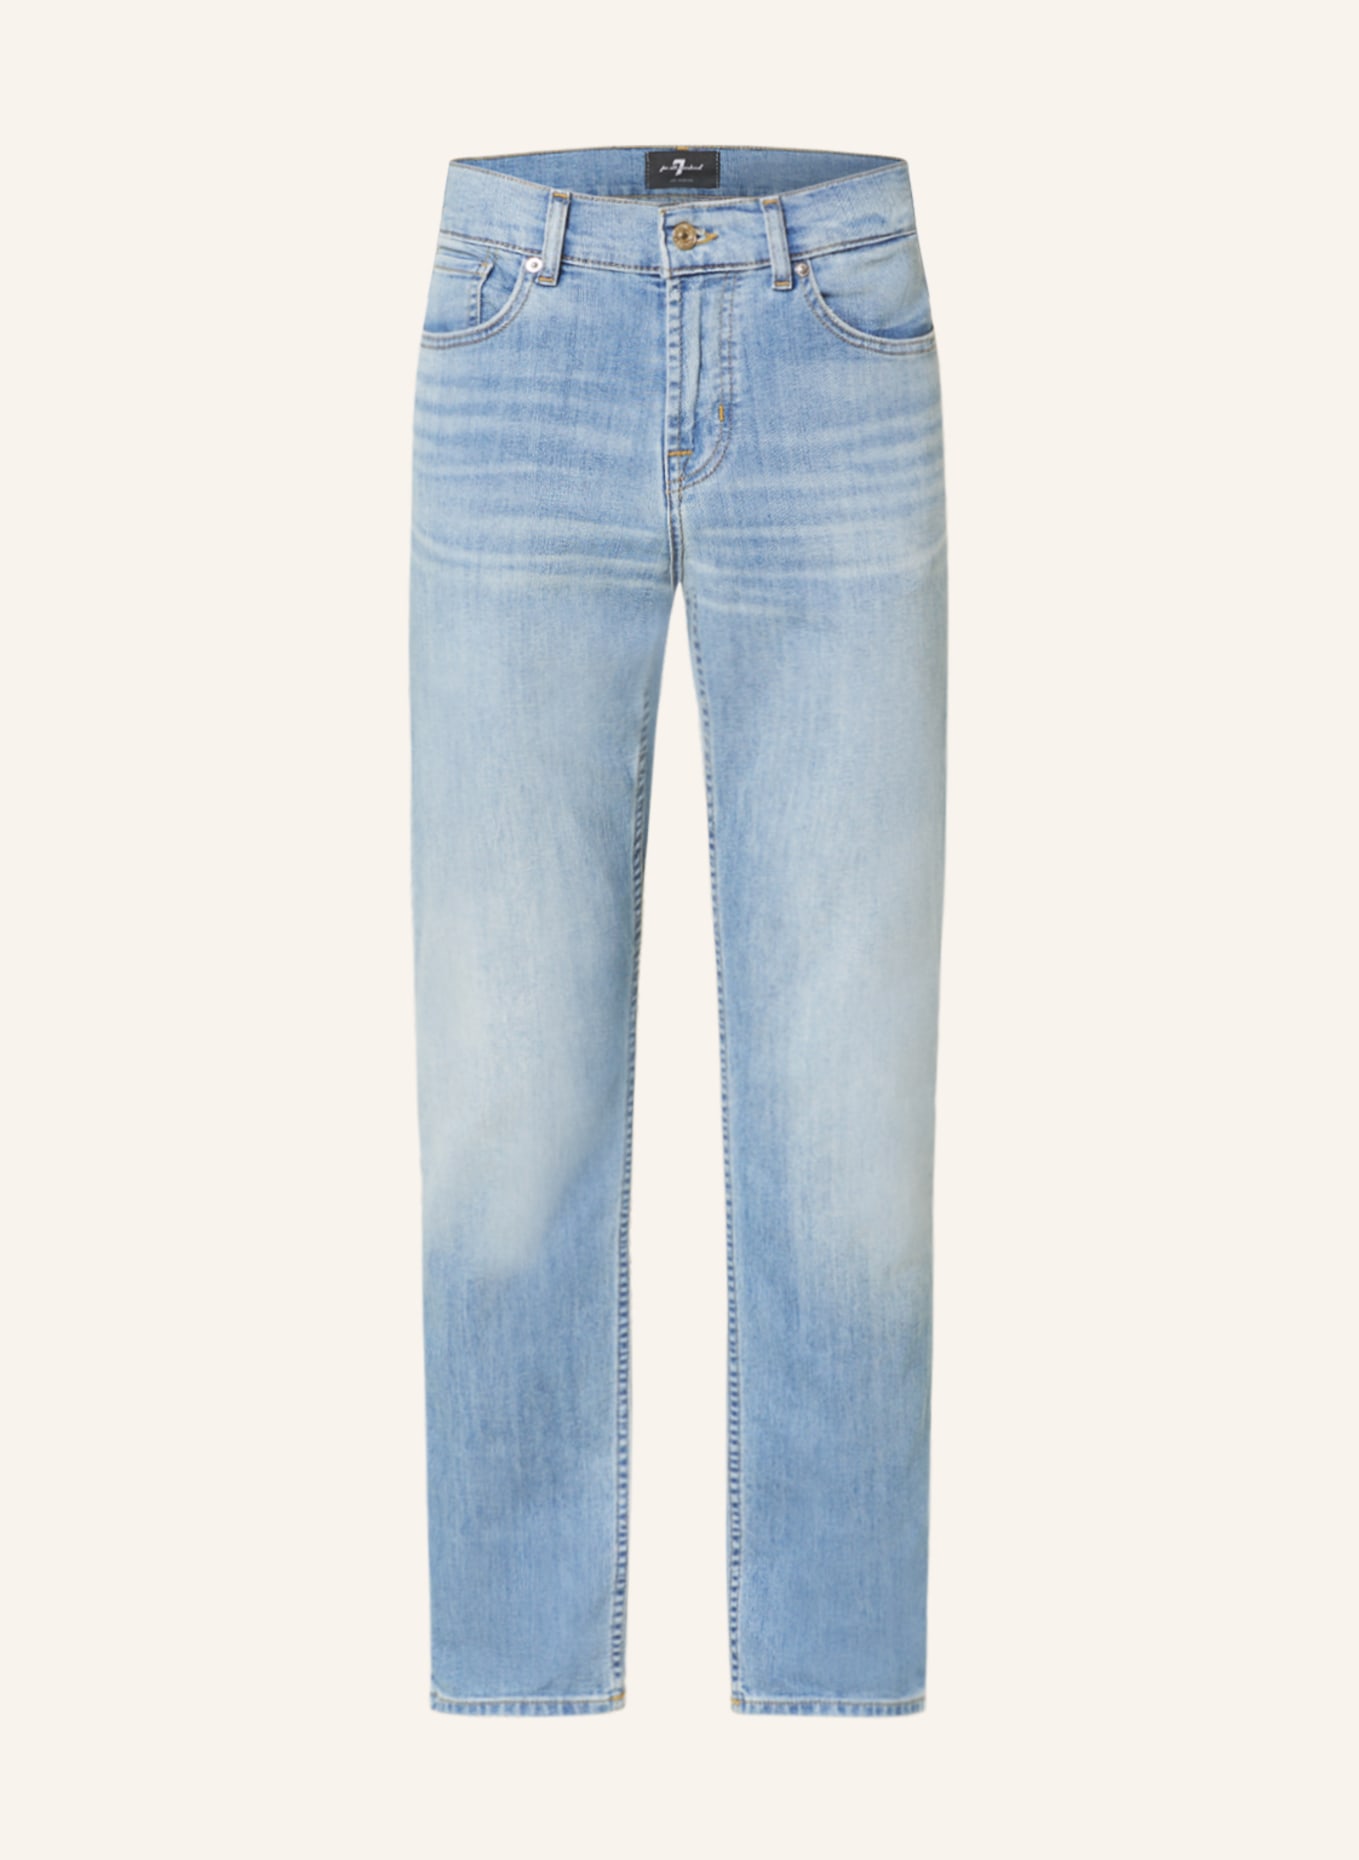 7 for all mankind Jeans SLIMMY Straight Fit, Farbe: LIGHTBLUE (Bild 1)